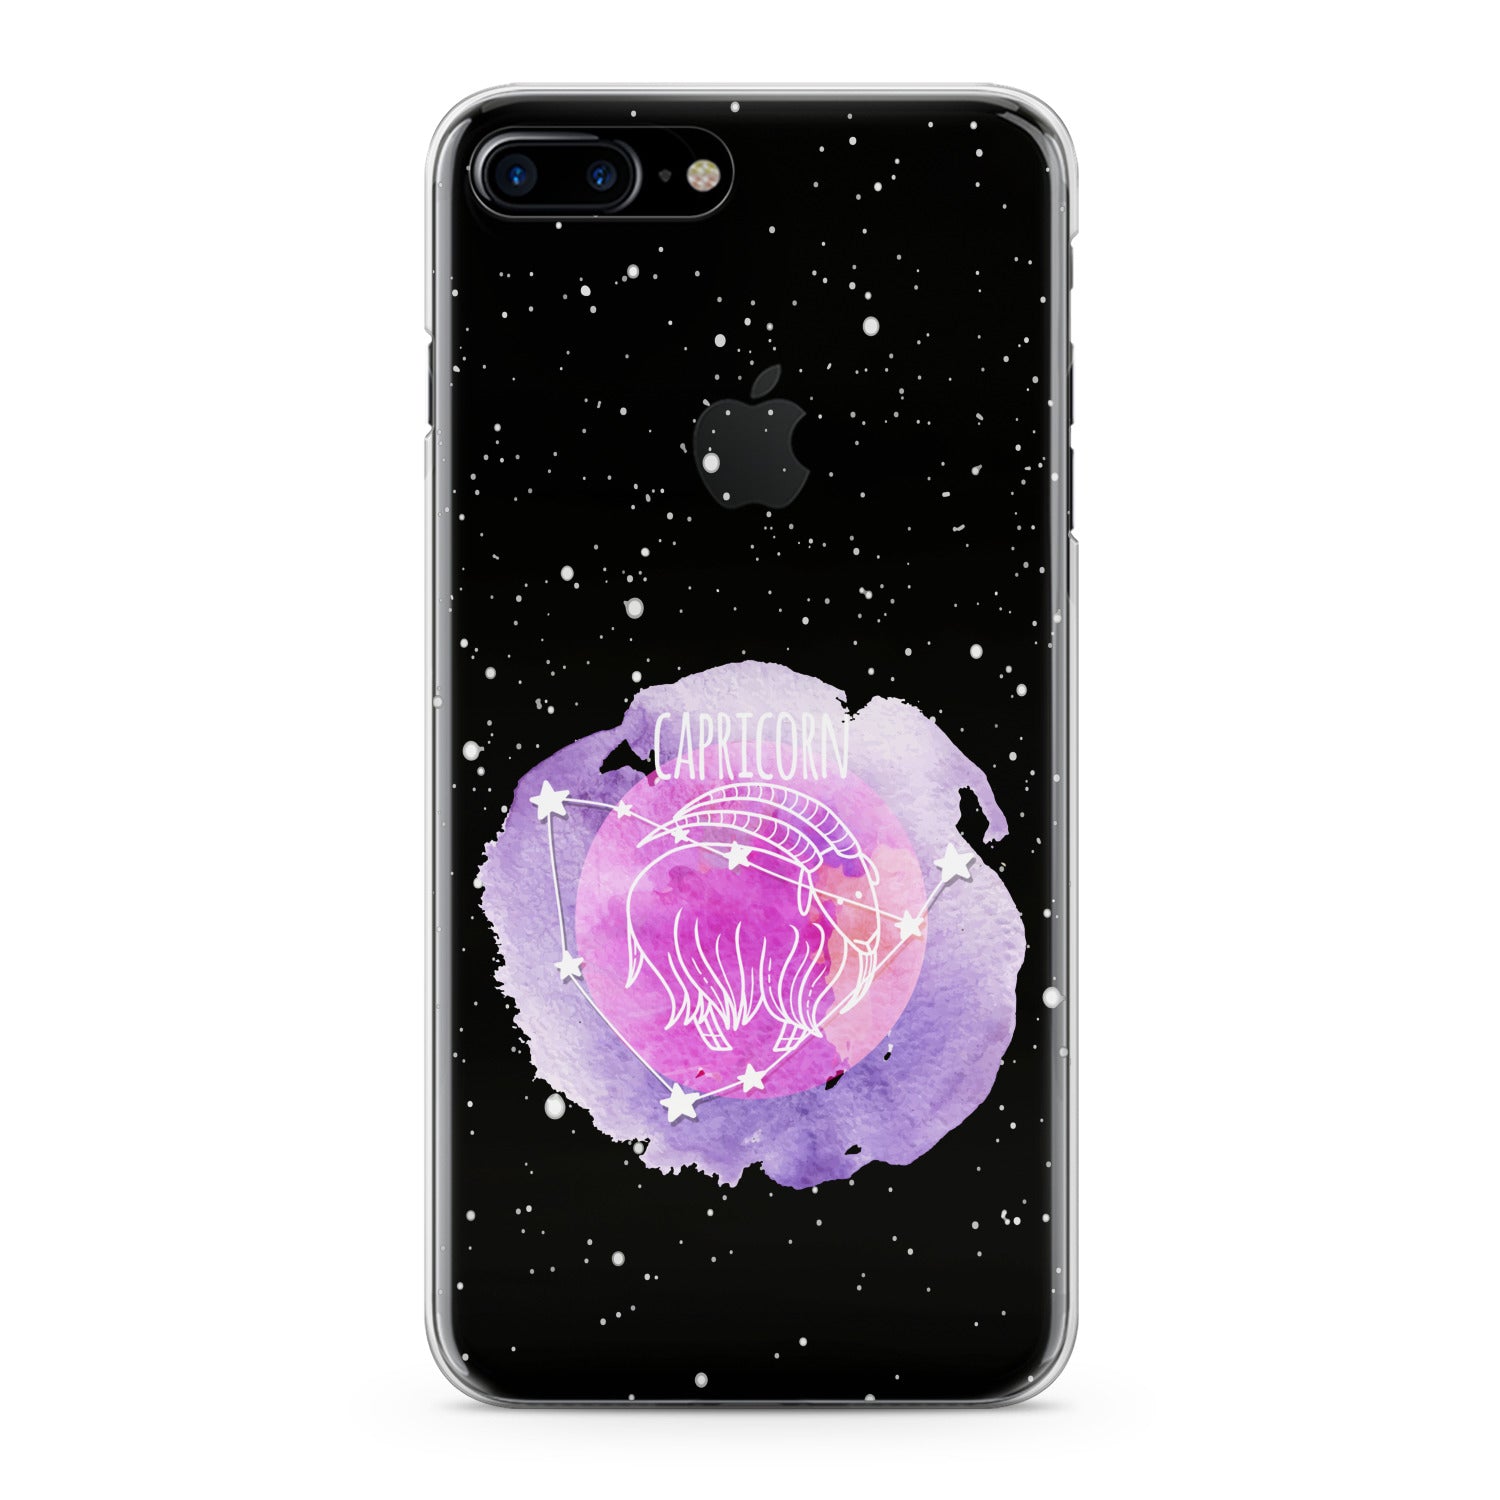 Lex Altern Capricorn Zodiac Phone Case for your iPhone & Android phone.